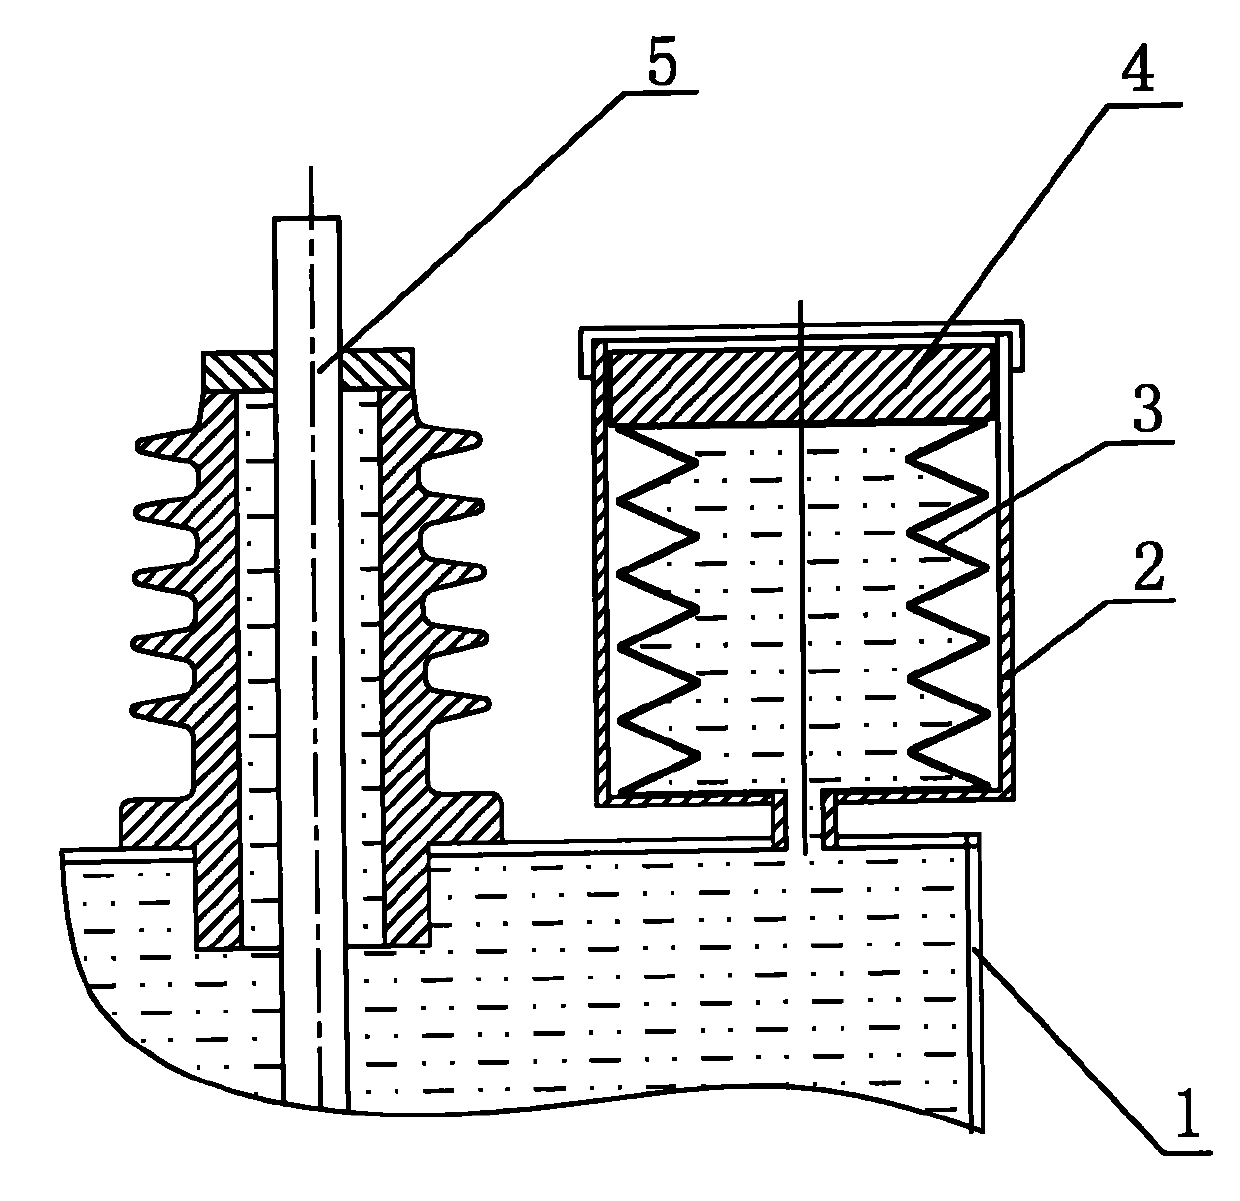 Expansion protecting device